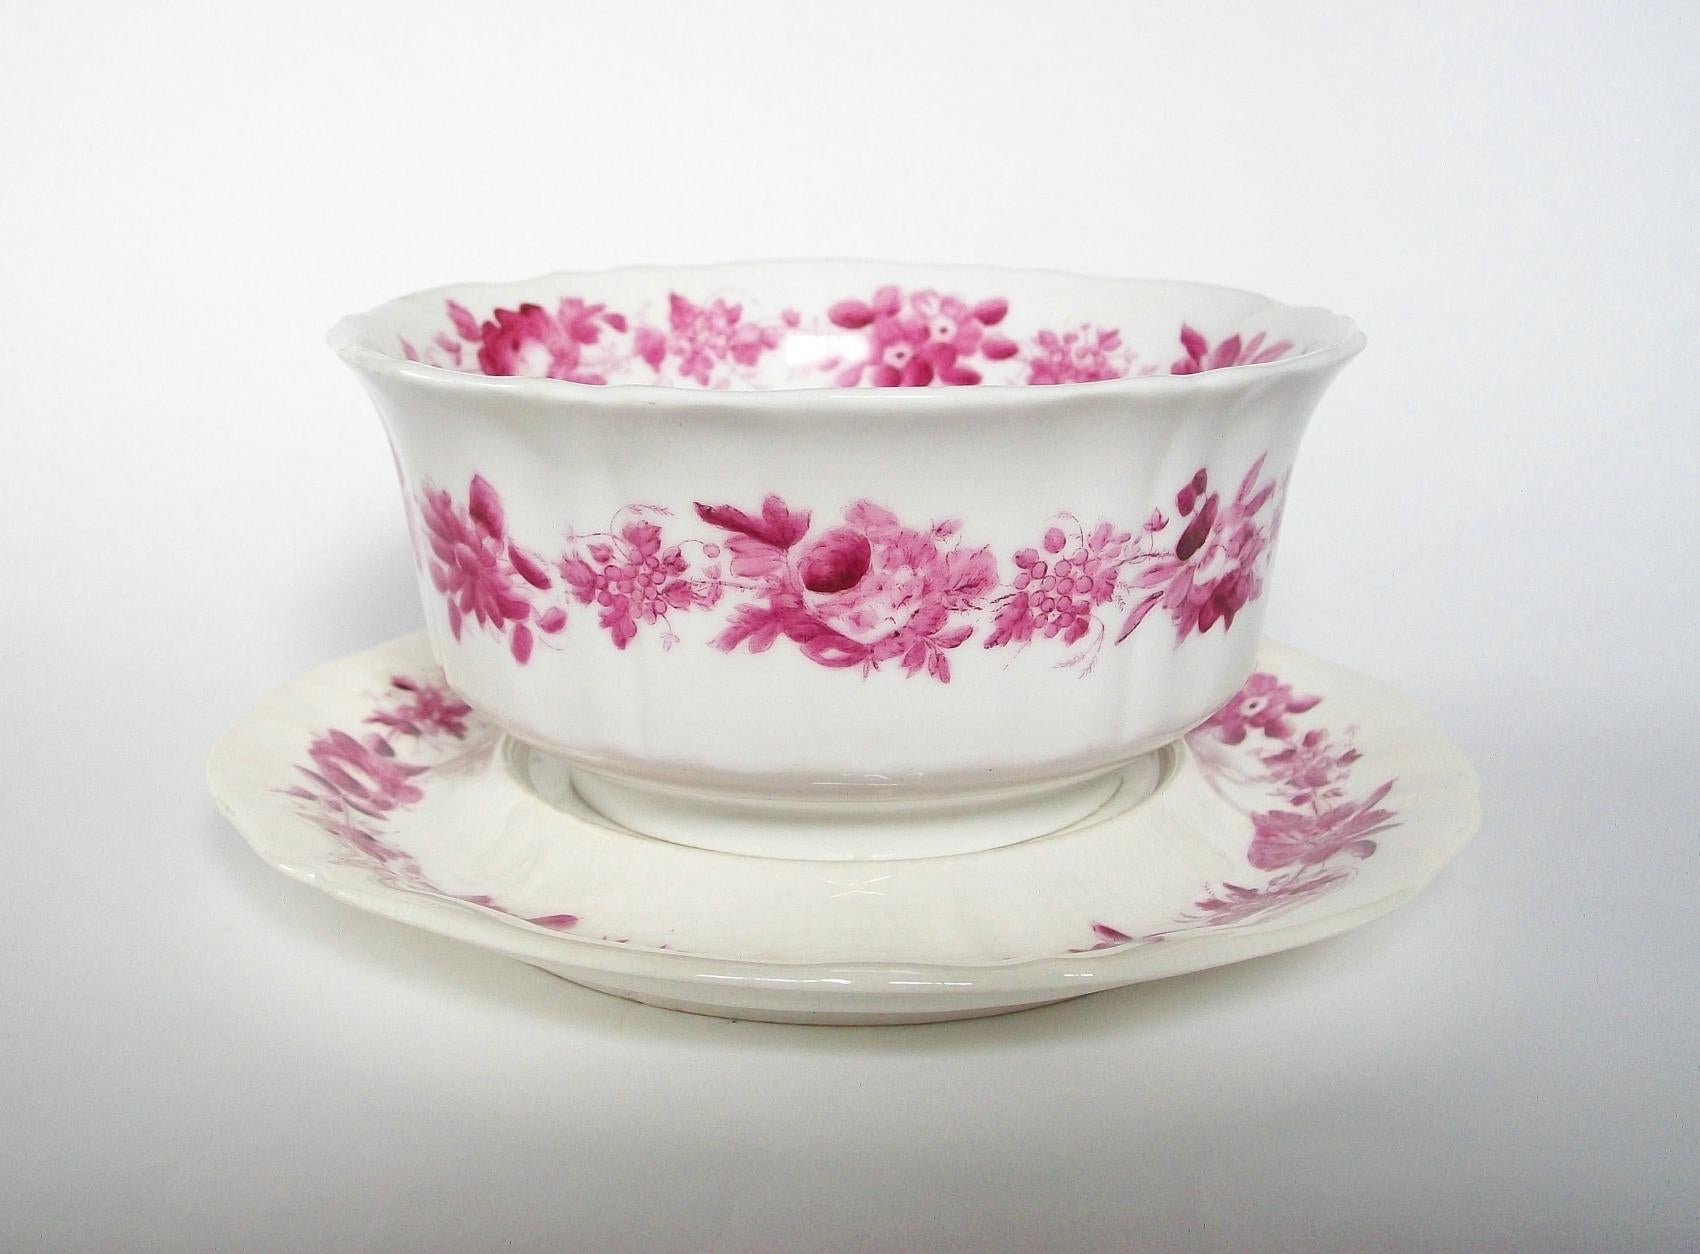 CHAMBERLAIN'S WORCESTER - Rare ceramic serving bowl on stand - transfer decorated in pink with floral borders and sprays featuring roses and passion fruit flowers - hand painted highlights - 1230 painted pattern mark to both pieces - impressed